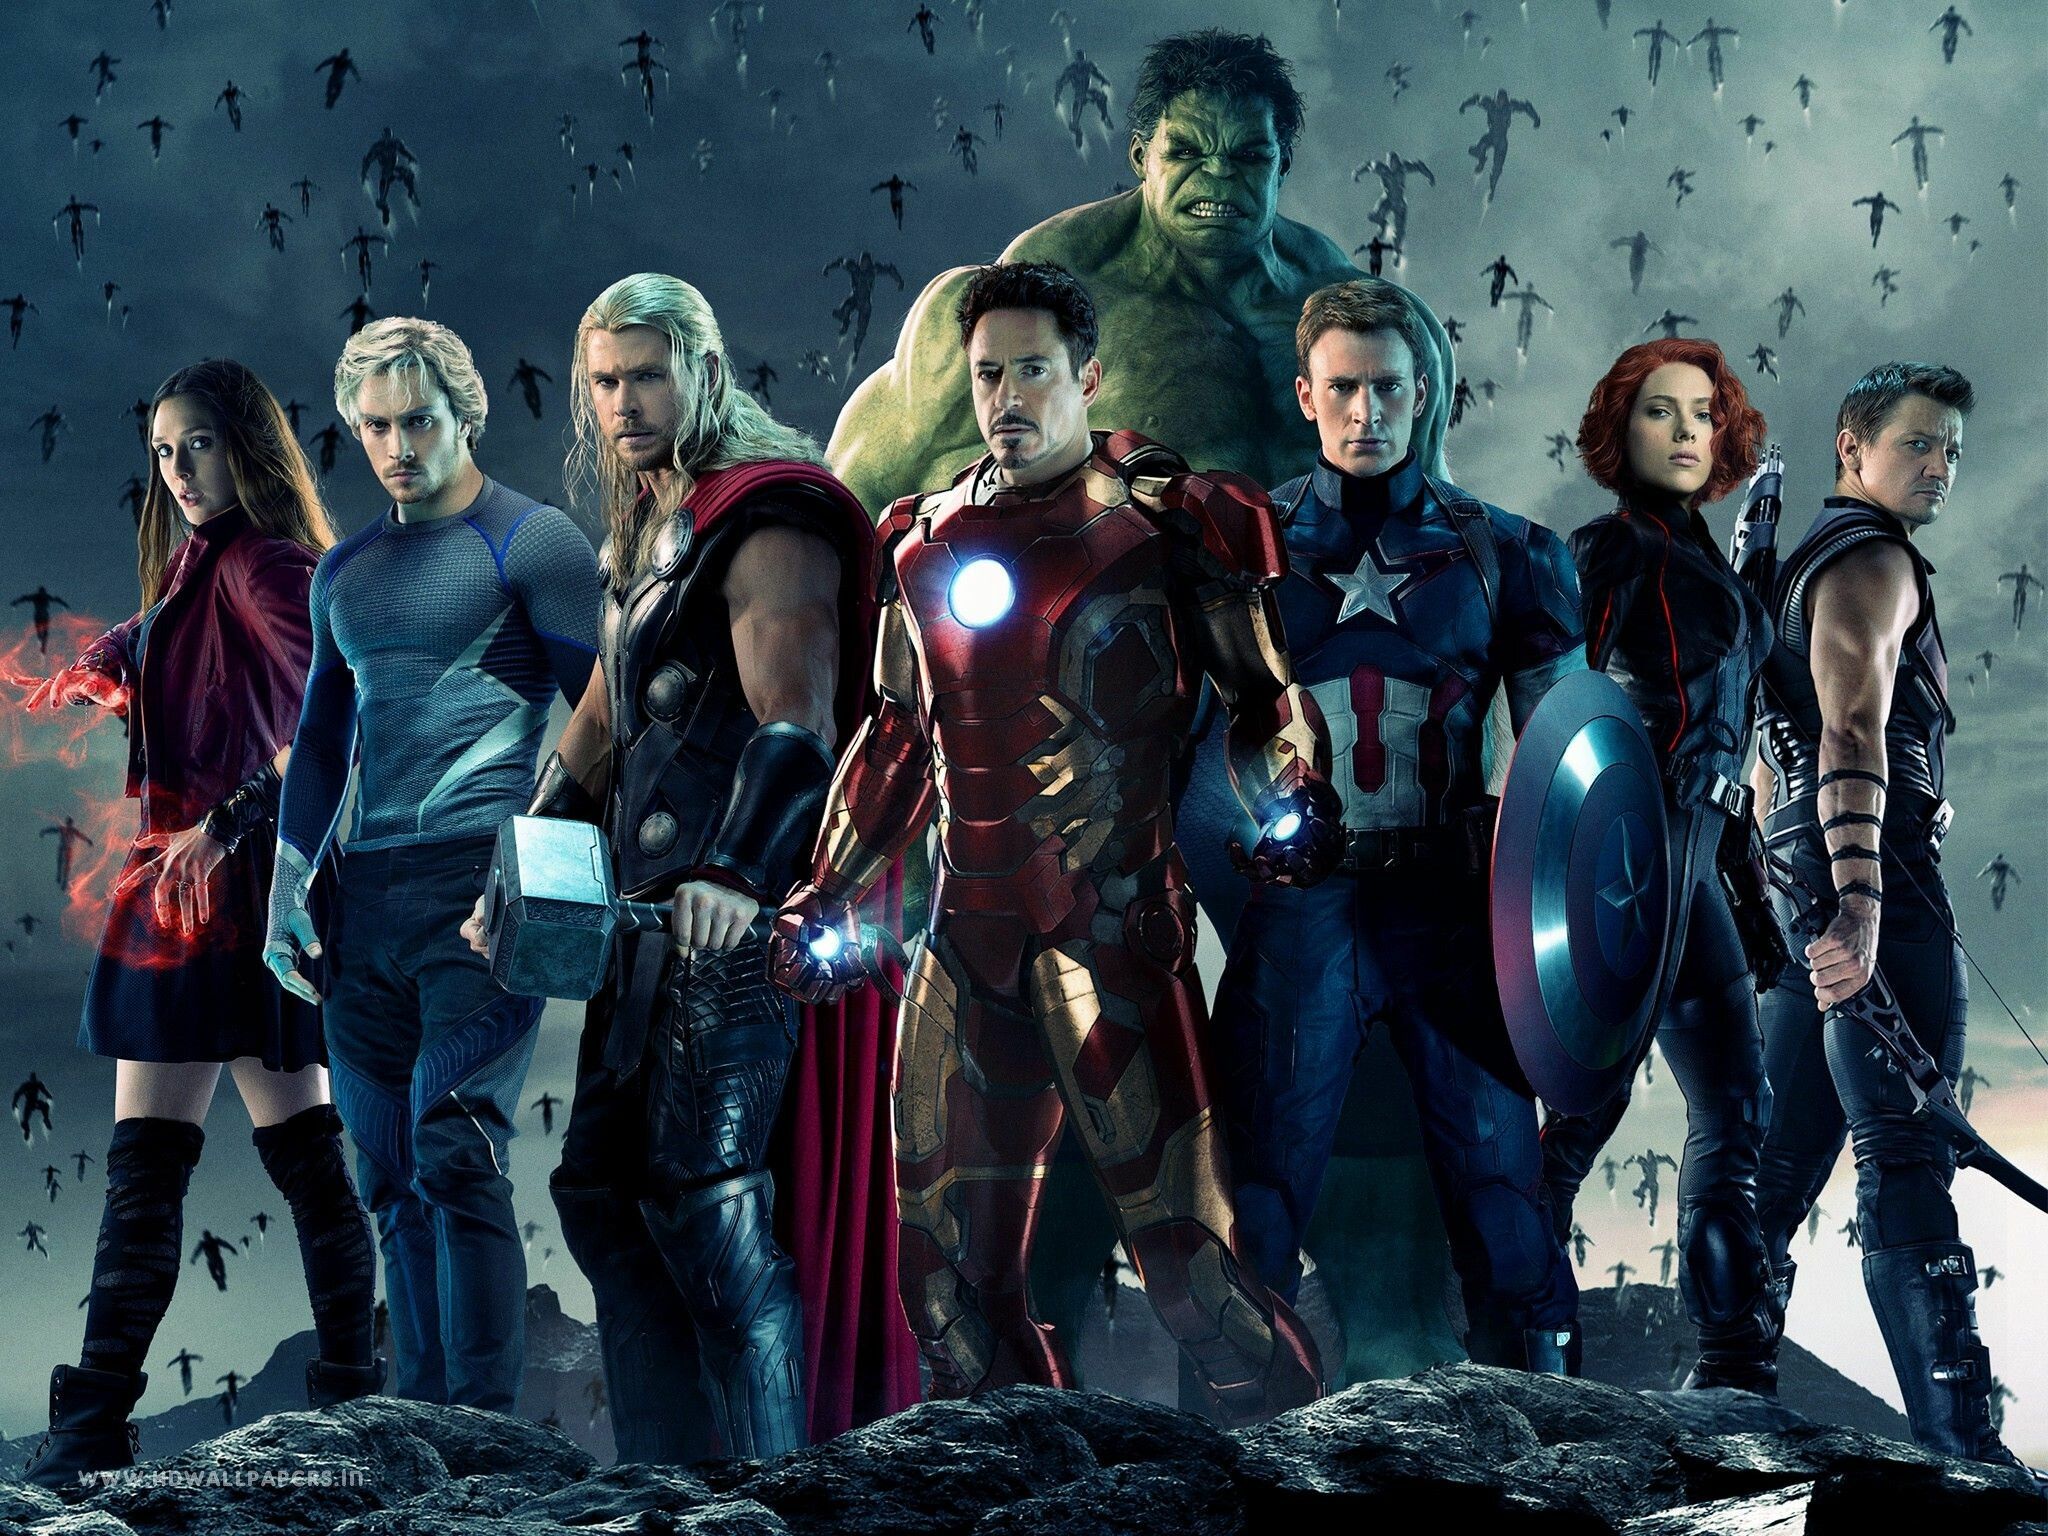 Avengers Movie Wallpaper: HD, 4K, 5K for PC and Mobile. Download free image for iPhone, Android